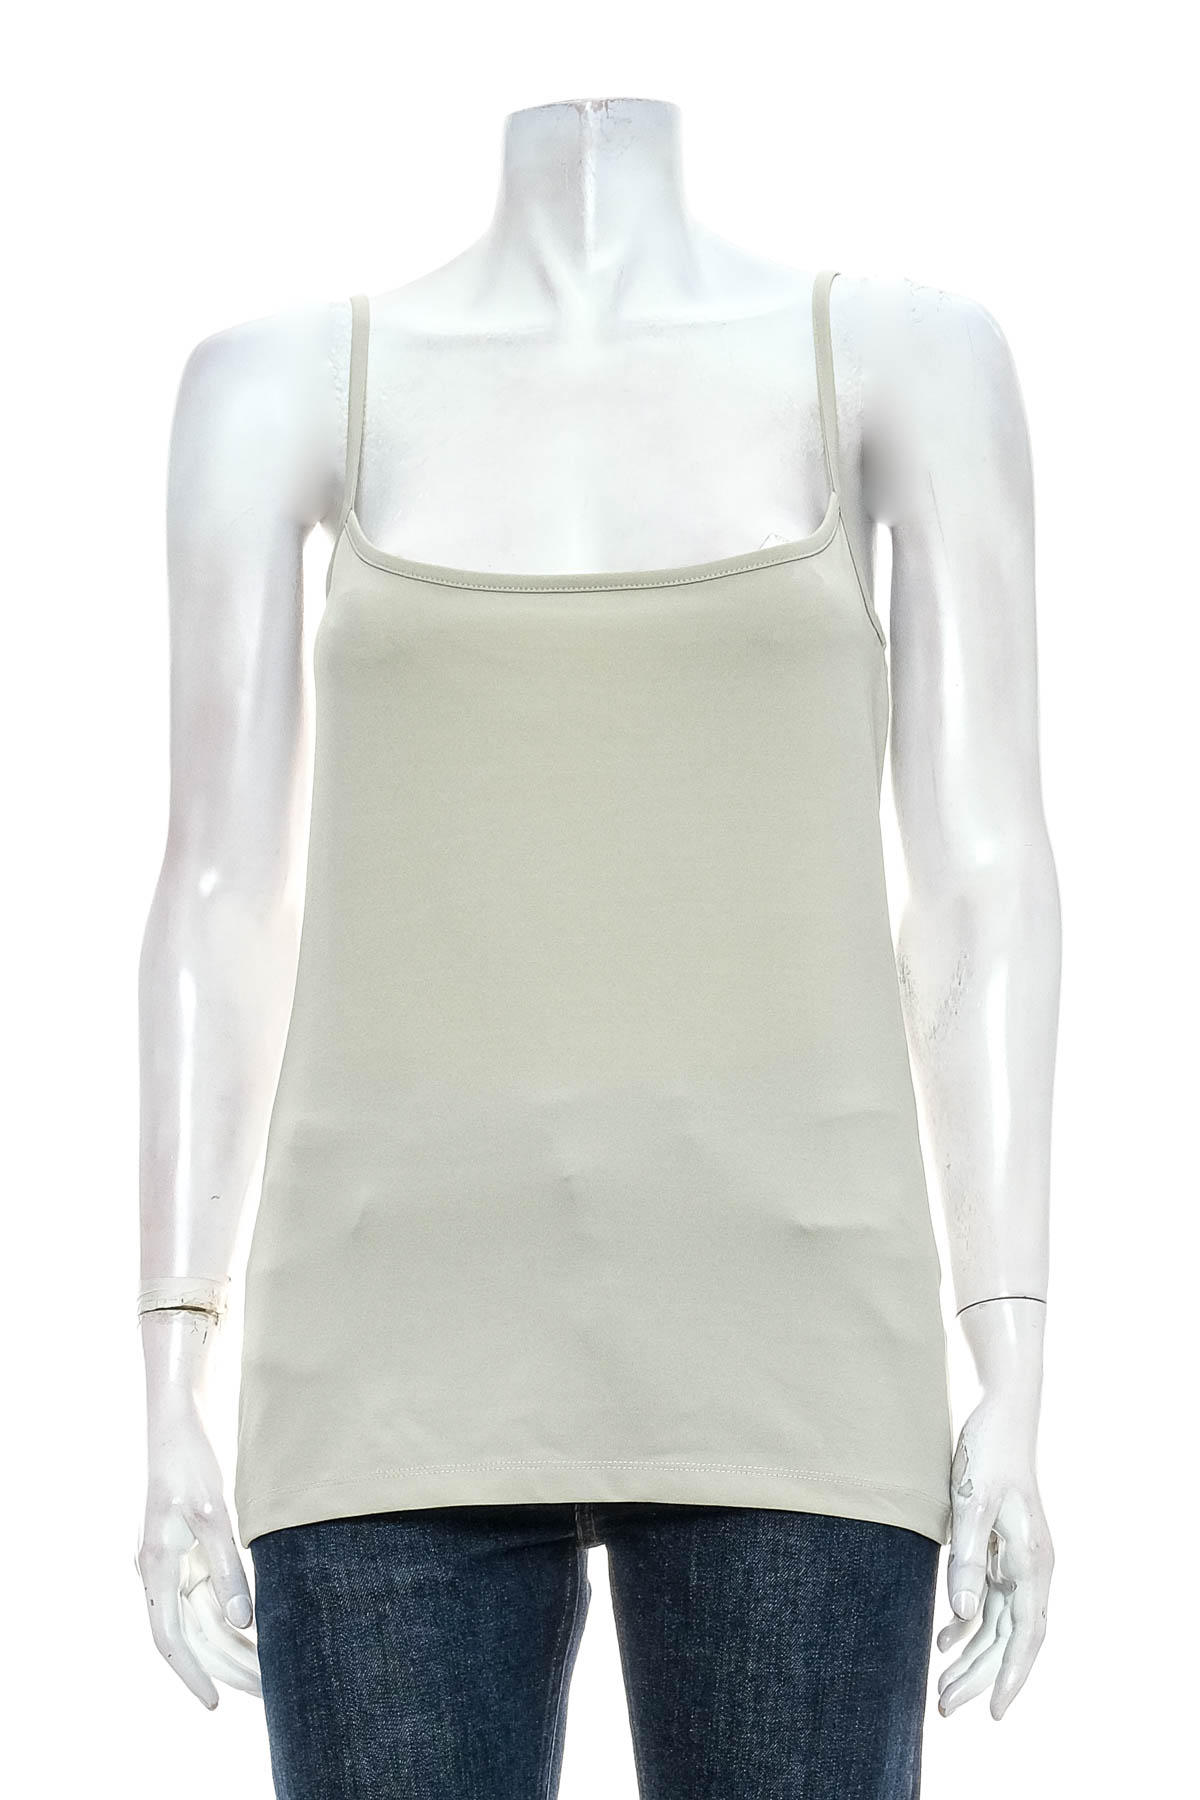 Women's top - Mar Collection - 0